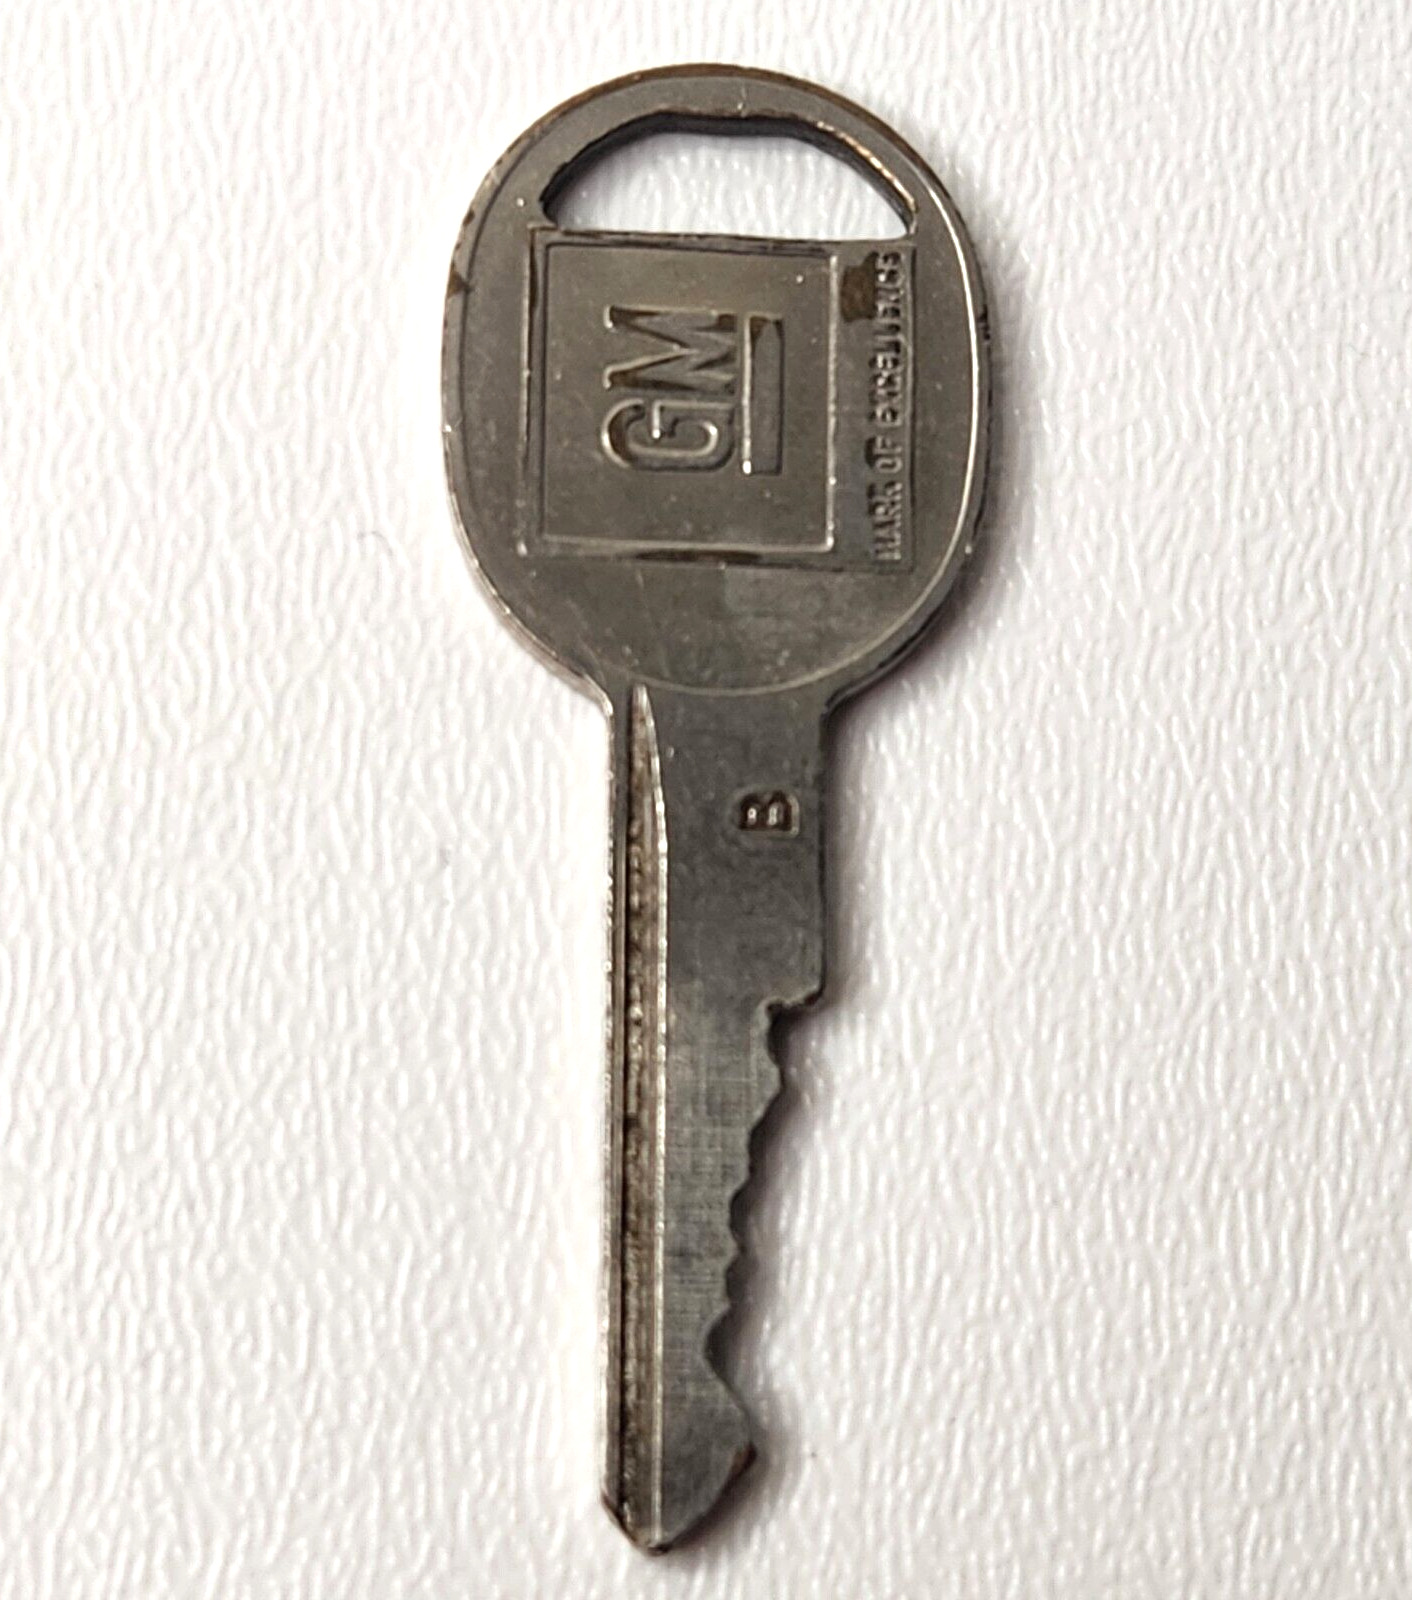 GM B Mark of Excellence Automotive Ignition Key Silver Vintage